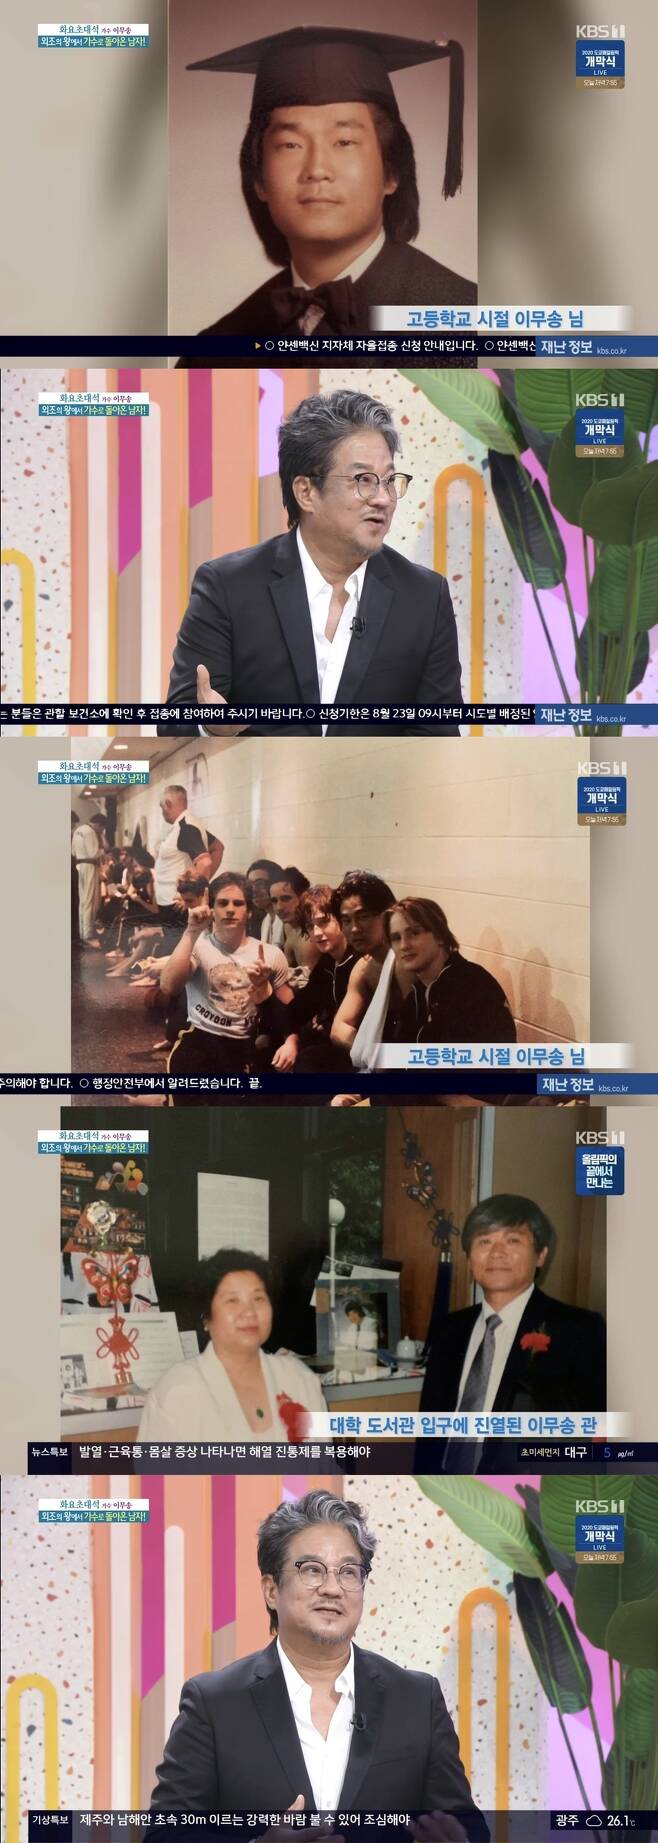 James Moosong Lee has shown deep talk from childhood memories to Noh Sa-yeon and anecdotes.On August 24, KBS 1TV Morning Yard, the life history of James Moosong Lee, a man who returned from the king of the outside world to singer, was revealed.MC Kim Jae Won announcer said, (Mr. Noh Sa-yeon) seems to be strangely incompatible, but he seems to live happily. MC Kim Sol-hee announcer also said, (Both of you) have a different tendency, but he is good at Alcondal Kong.James Moosong Lee said, Im always talking about it somewhere, but its a lotto. Nothing fits. Its so different.I am very excited about the broadcast, but I usually talk a lot, but my wife and wife are always full of energy, so my voice is so loud. Kim Jae Won announcer said, James Moosong Lee and his wife eat with their acquaintances, and when the woman does not have a good sesame leaf, James Moosong Lee takes off the sesame leaf.There is a case in which Mr. Noh Sa-yeon has been furious about this, James Moosong Lee said, I really do not seem to be comfortable eating.No matter who looks at it, I also press it at home while eating. Then Kim said, Good job, I do it.I do not want to take the sesame leaves, so I eat two at once. James Moosong Lee sympathized with Lim Mi-sook, and Lim Mi-sook said, But why do you keep looking at her and take off the sesame leaves? James Moosong Lee said, Then why do you care if your wife eats five or ten sheets? She says, I know and I will eat more or drink water.Then, on the side of the road, high school students said, Do not take off your sesame leaves. Then I realized that it was the sentiment of the Republic of Korea.I was eating rice. I thought it was manners, but I do not eat sesame leaves after that. James Moosong Lee said that his age continues to change. Everyone in the entertainment industry has a situation, and in the case of me, Mr. Noh Sa-yeon is reminiscent.So, there are not many such things at the time, so I tend to go back and forth for relationship. Kim Jae Won announcer said, The age culture is a little strange because the age is different from the western age and the oriental age.James Moosong Lee is busy asking about the contact information of Bong Joon-ho these days.James Moosong Lee said, I have read a book before, but in 2012, Music Melody, the originality of the code progression is over.Since then, Music has always thought about the fact that there is a copy of Music somewhere.This is how new scales can be created, thinking that a new Melody platform is needed and accepted.It is the point and culture of our lives that can be in 10 years from now. We can discover new culture, vision and lifestyle through movies. When asked if he would marriage Noh Sa-yeon even if he was born again, James Moosong Lee surprised everyone by marking X.James Moosong Lee said, I actually think my wife should meet Na-eun more than me.I have to meet people who are bigger and bigger because they are much bigger and richer than me. Kim Jae Won announcer pointed out, I found a good reason, but it is a bit difficult.However, James Moosong Lee said, I have experienced this and that in my life, I think it is right to have another experience.Sometimes we think that love is an obsession or possession. When it is not met, we fight. Our child is 27.I am continuing to study and make my way. I am watching. On this day, the amazing past of music genius James Moosong Lee, who has been fluent in writing, composing and playing since his school days, was revealed.James Moosong Lee said, The opportunity to get to music from a young age was when my father took a lesson and got on an outer ship.There were times when I could not come back for a few months, but every time I came back, I brought dozens and hundreds of LP editions, and when I was young, foreign music began to improve.That was when United States of America Music poured in in the 1970s.I learned a lot about Western music, and when I was in high school, I formed a band and went to perform and was a teen star. The United States of America University Library, where James Moosong Lee graduated, also has the James Moosong Lee Pavilion.James Moosong Lee said, It is time to make music activities in its own way.I came out as a United States of America representative of the college music system, received a statue, and I was able to make a lot of sounds as I came to Korea and met Kim Chang-wan and made an album.I was also a musical performer and proud of it at school. Foreigners are not so common.I exhibited my album and statues, lyrics and compositions at the entrance of the library. I was very proud. James Moosong Lee was surprised to find that he performed our folk song in front of 2,000 people and that the contents were once in the headlines of local newspapers.